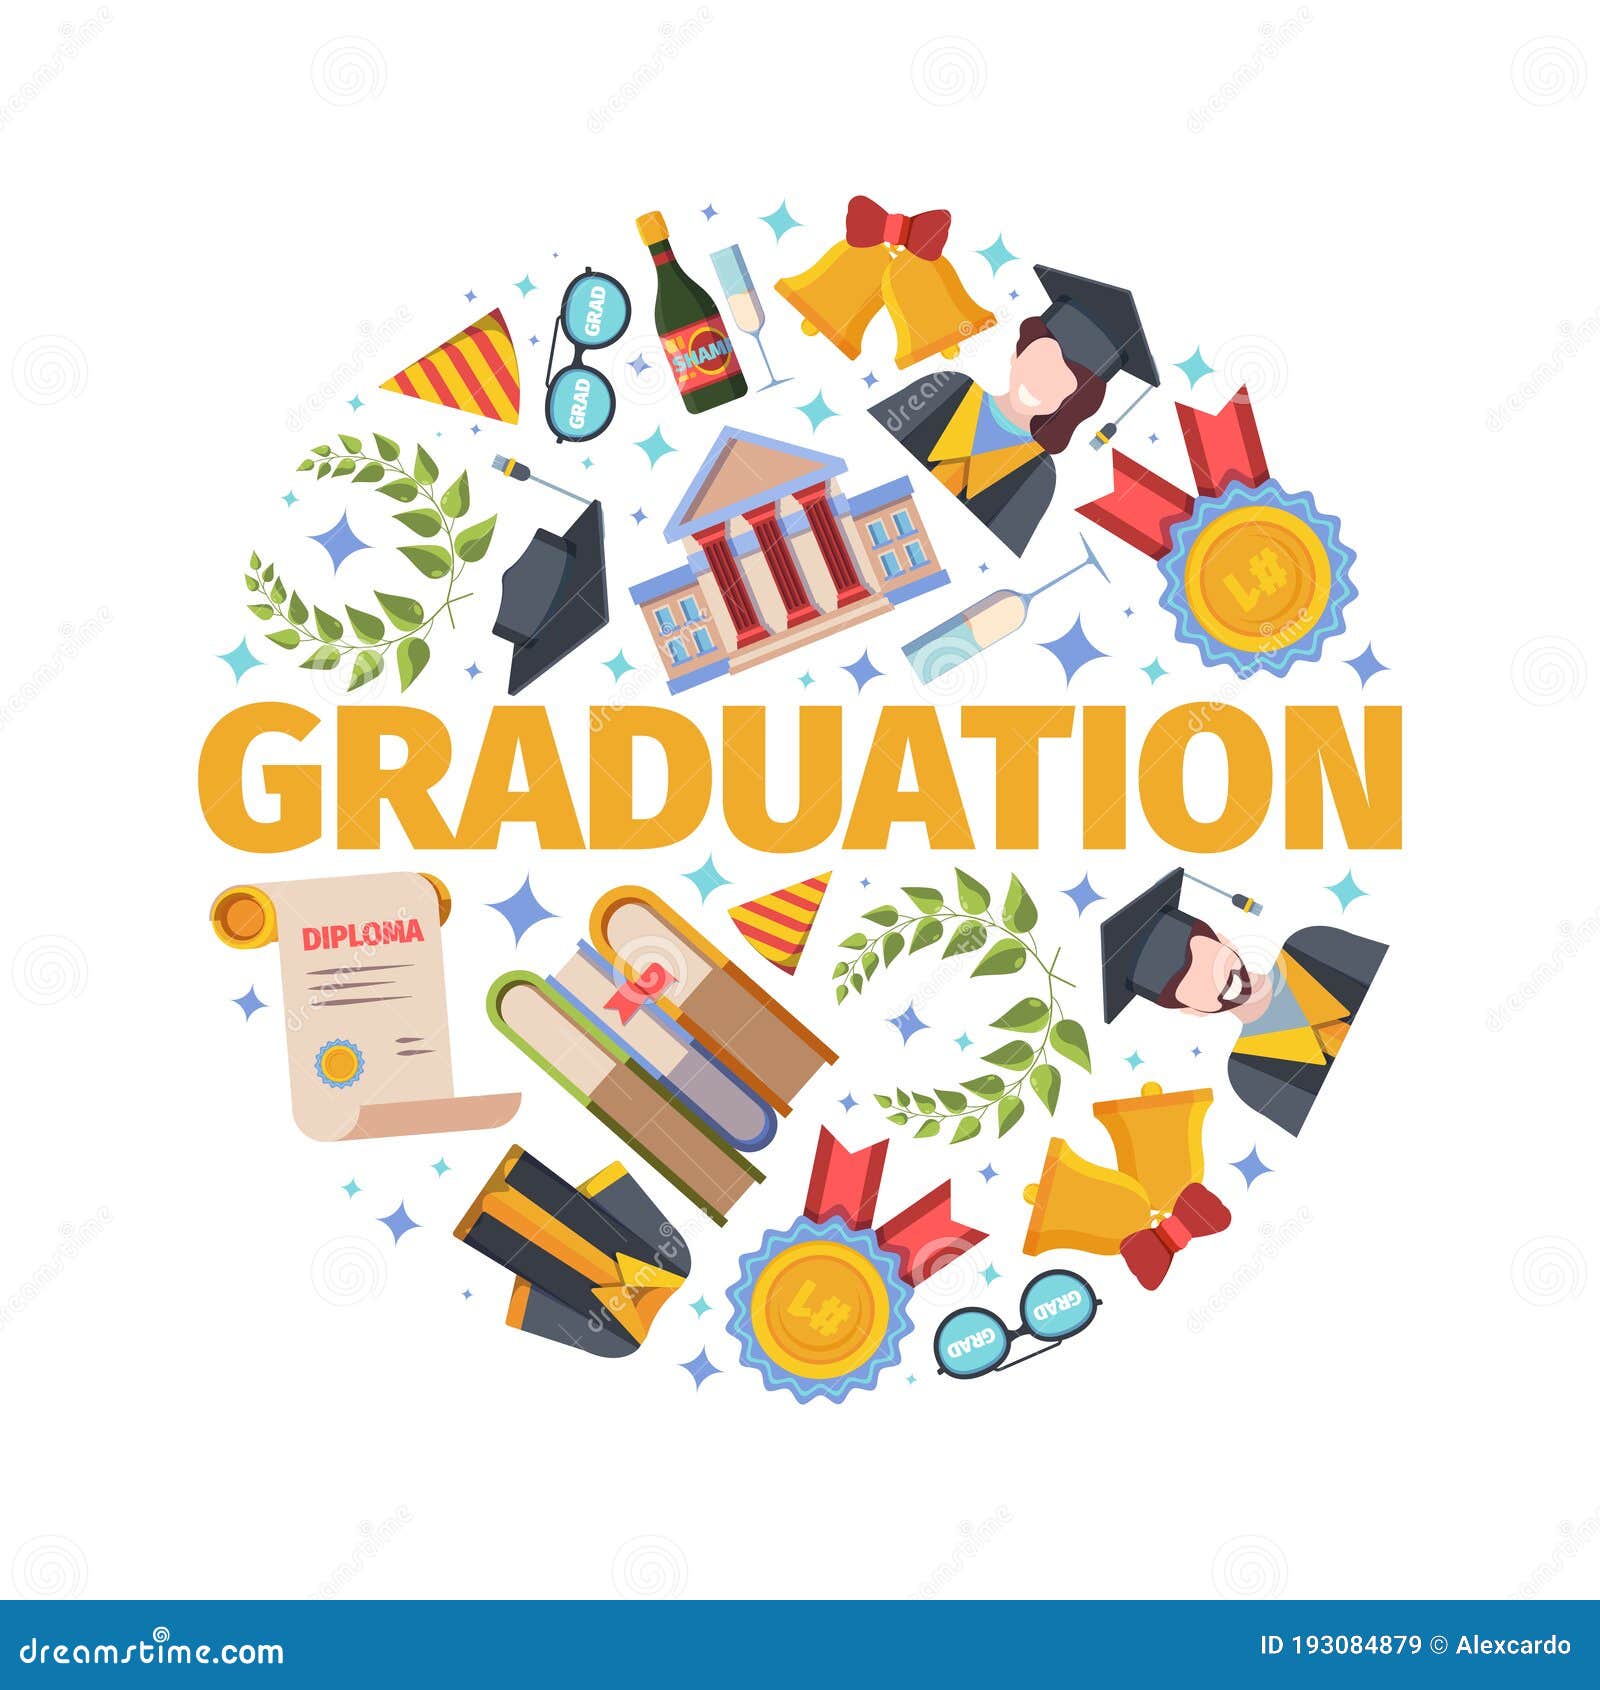 highly anticipated graduation concept. joyful holiday for new scientists and workers successful defense bachelors and